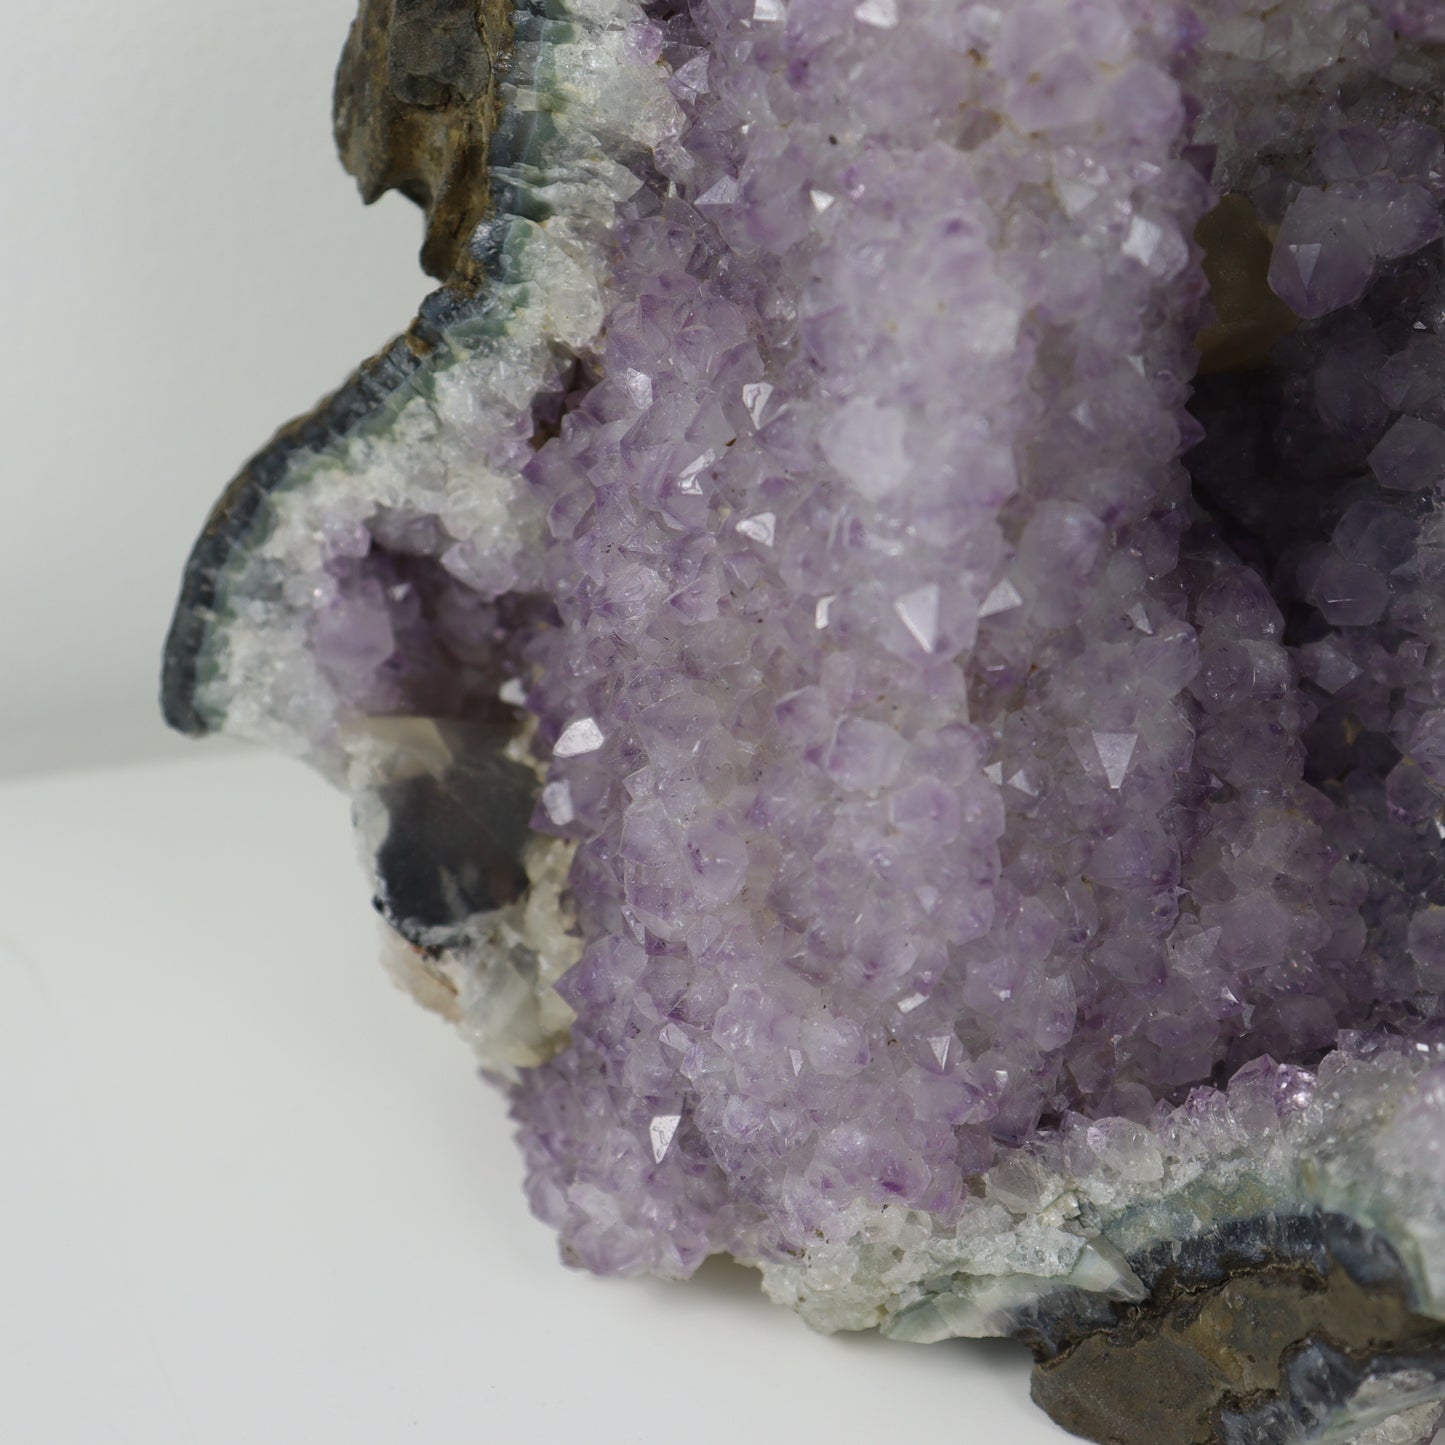 Amethyst Geode with Clear Quartz Inclusions